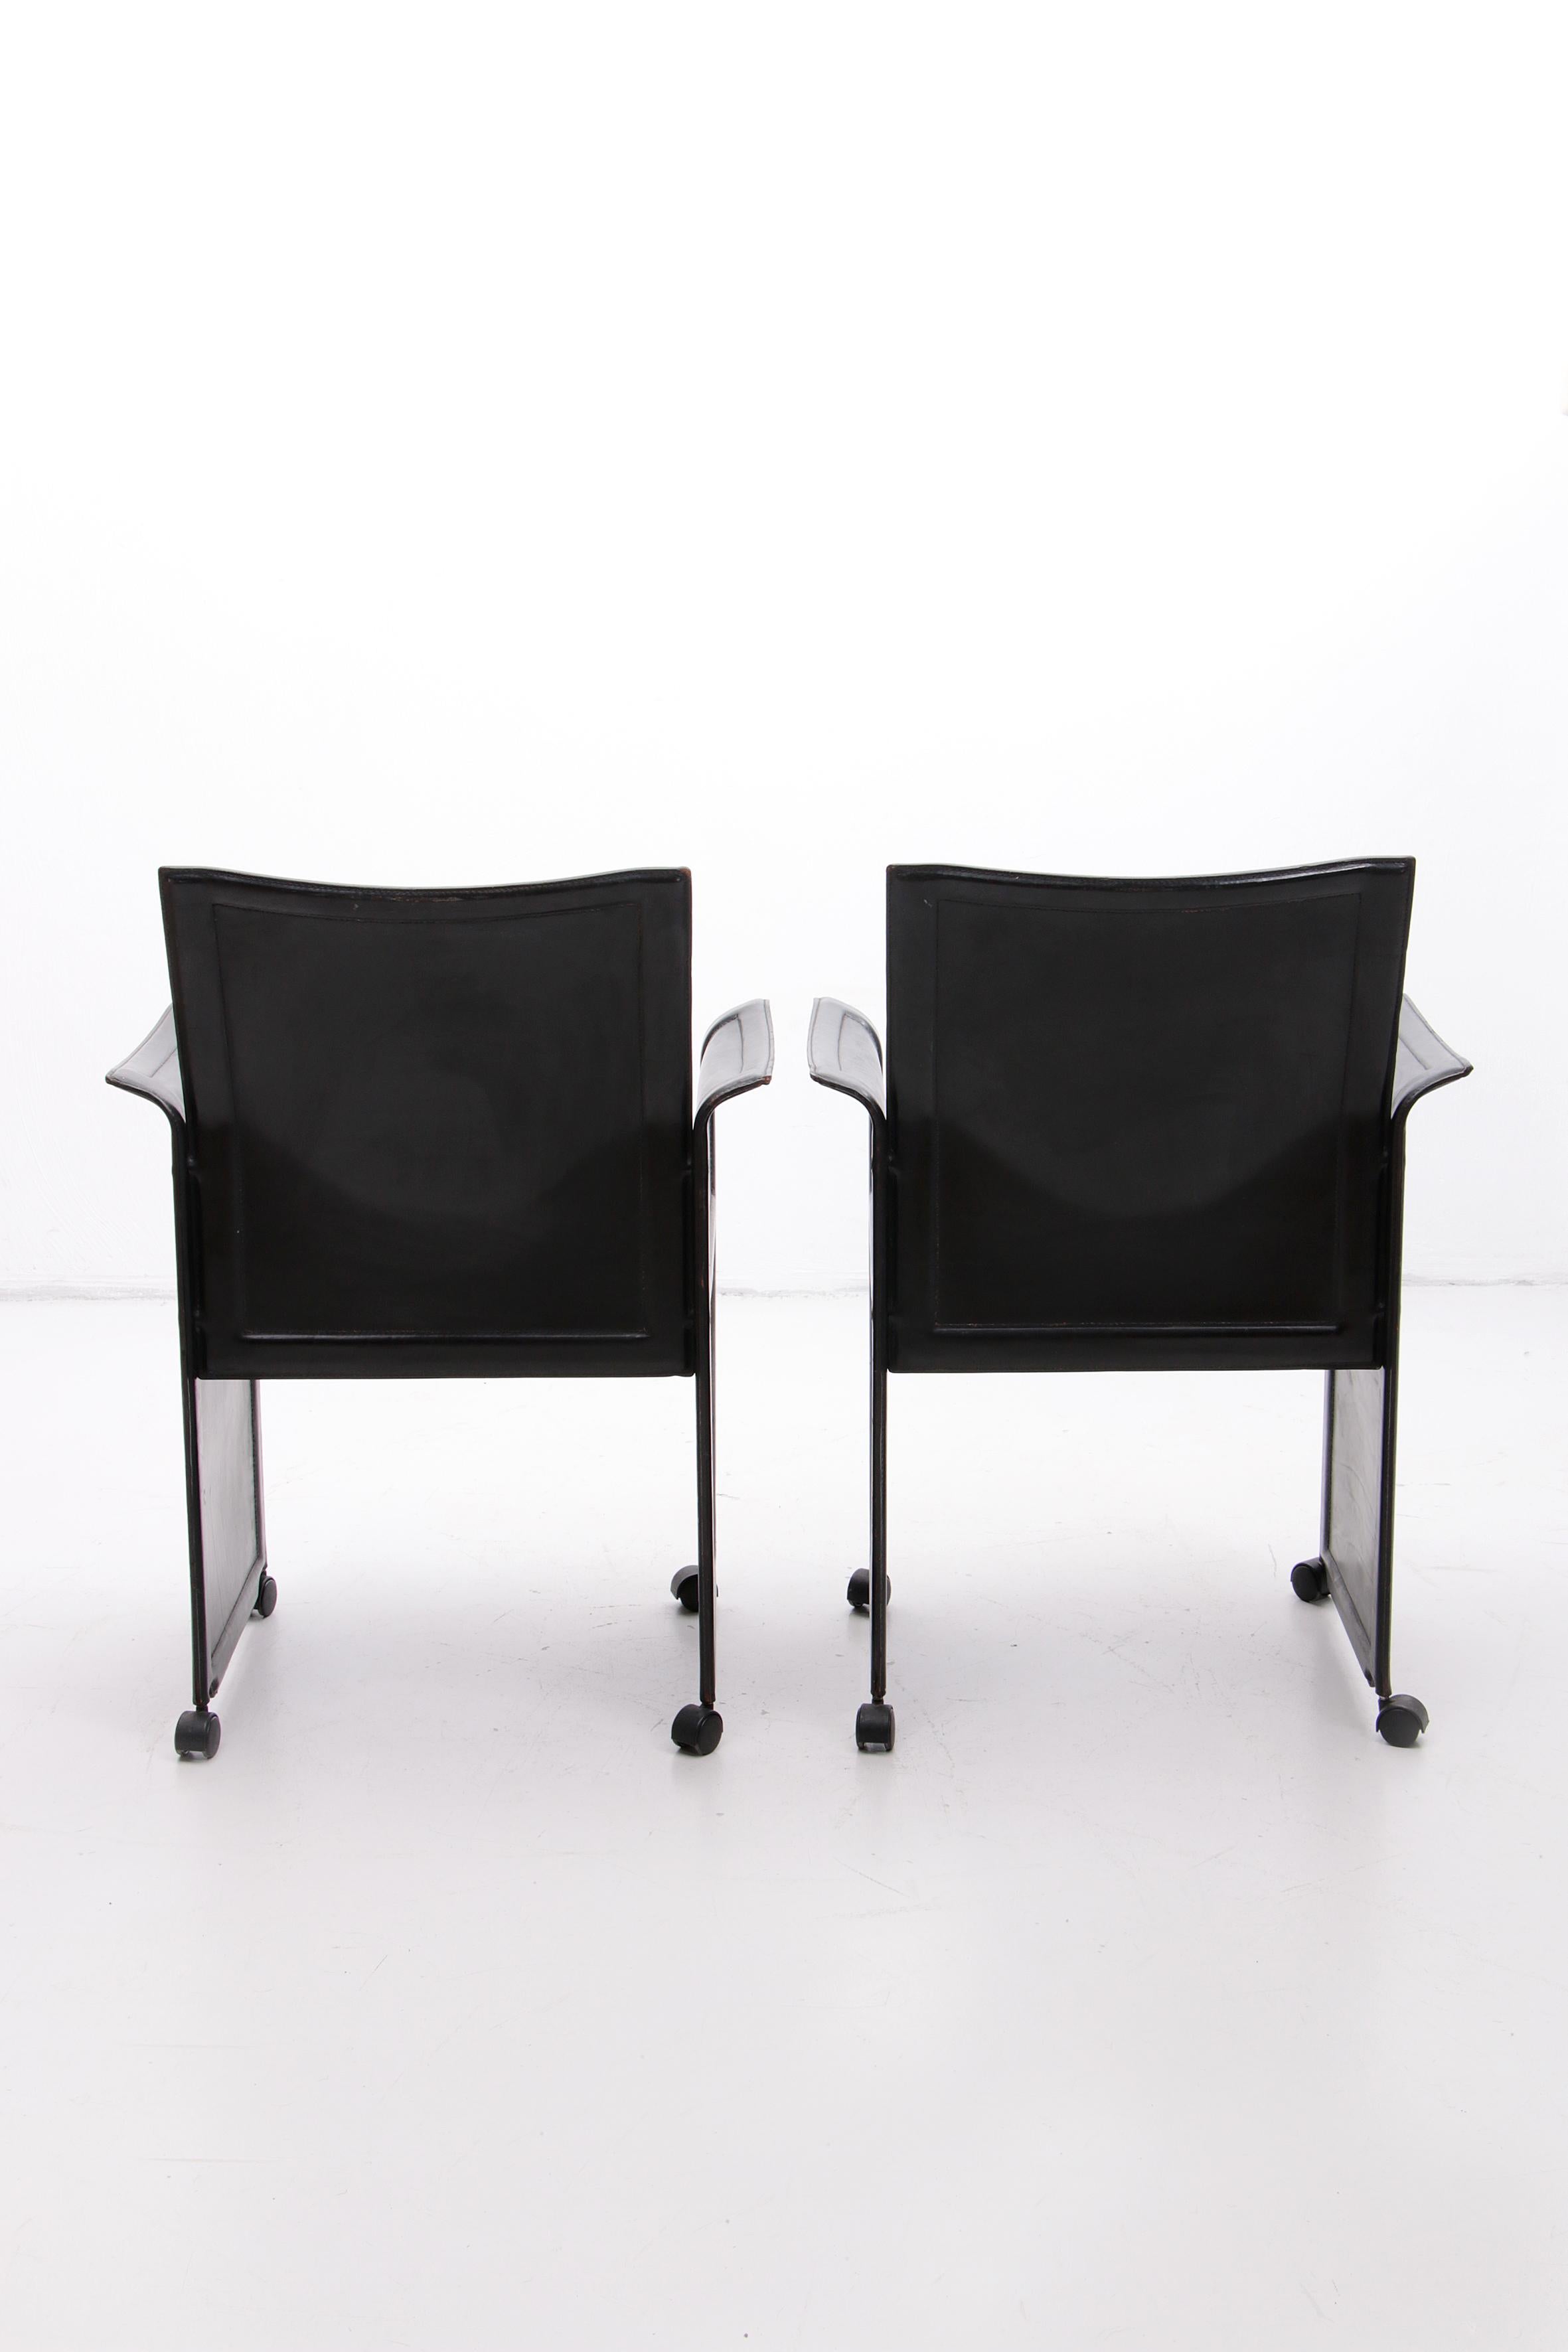 Matteo Grassi Korium Armchair Black Leather, 1970 In Good Condition For Sale In Oostrum-Venray, NL